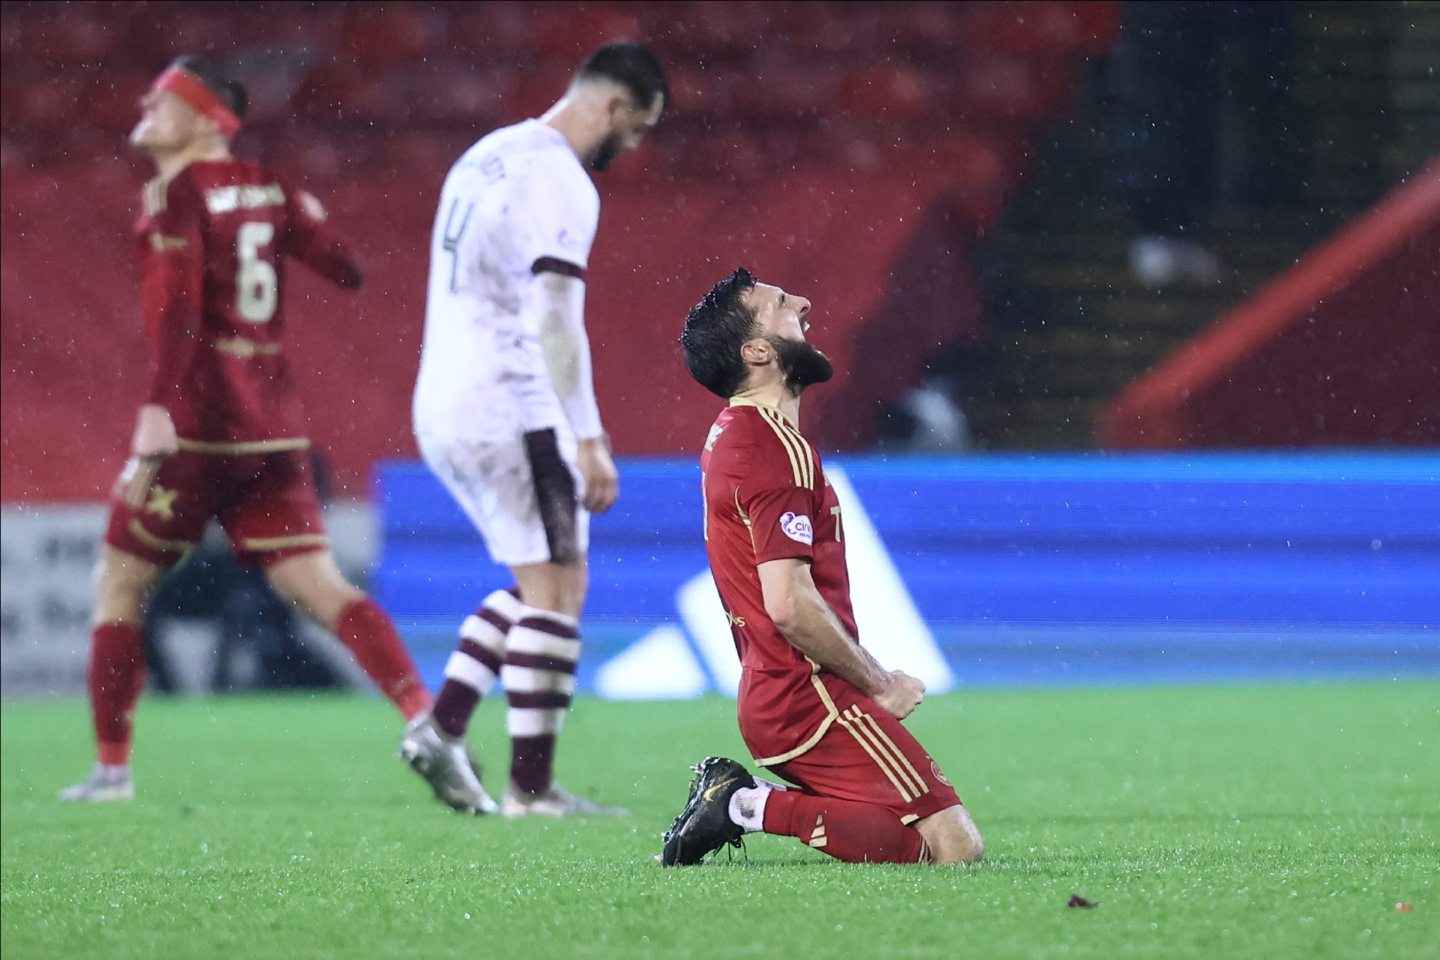 Aberdeen captain Graeme Shinnie celebrates at the end of the 2-1 defeat of Hearts at Pittodrie. Image: Shutterstock 